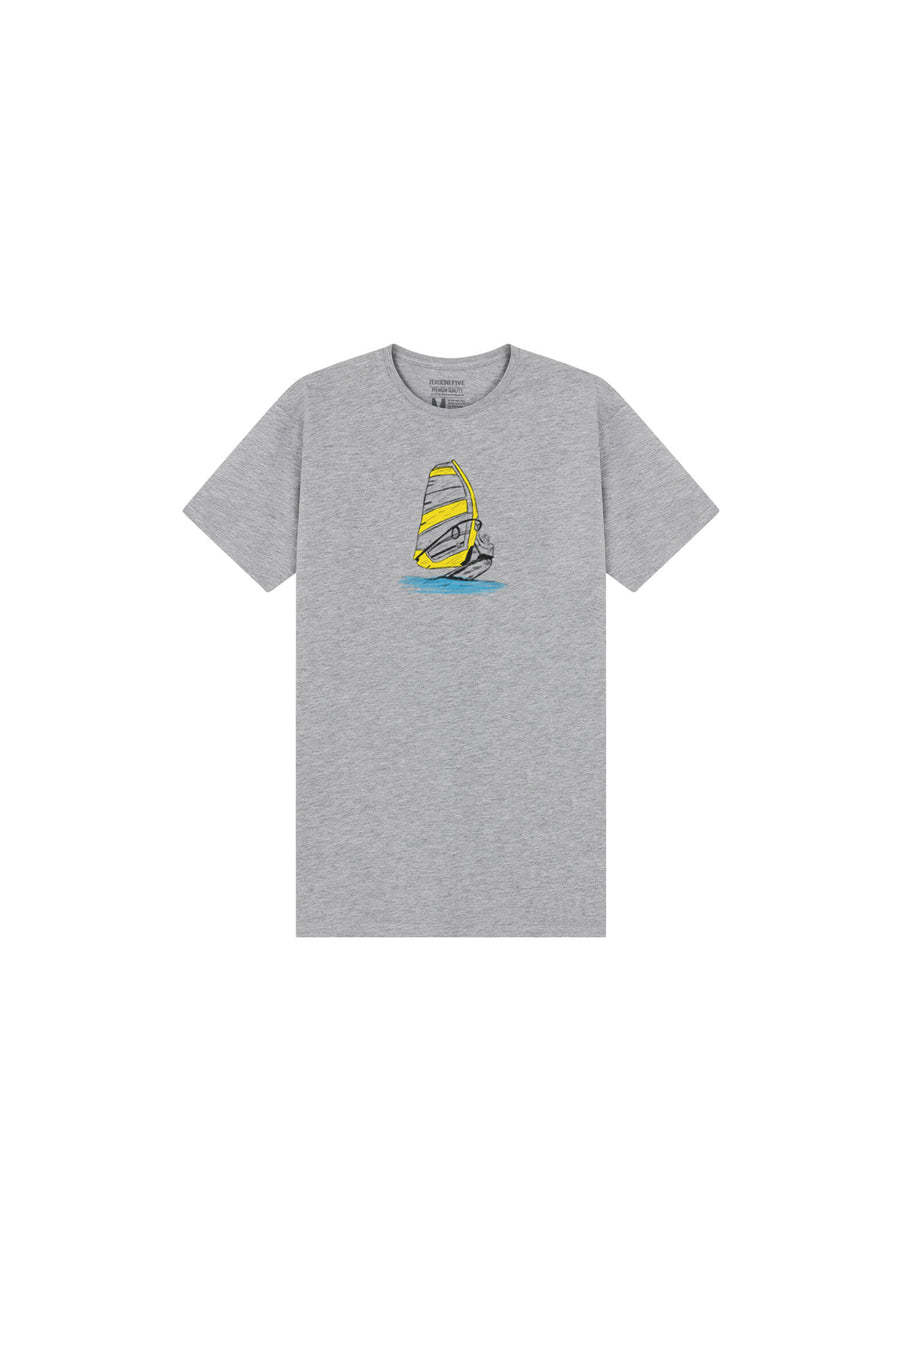 Kids' Passing By T-Shirt Grey